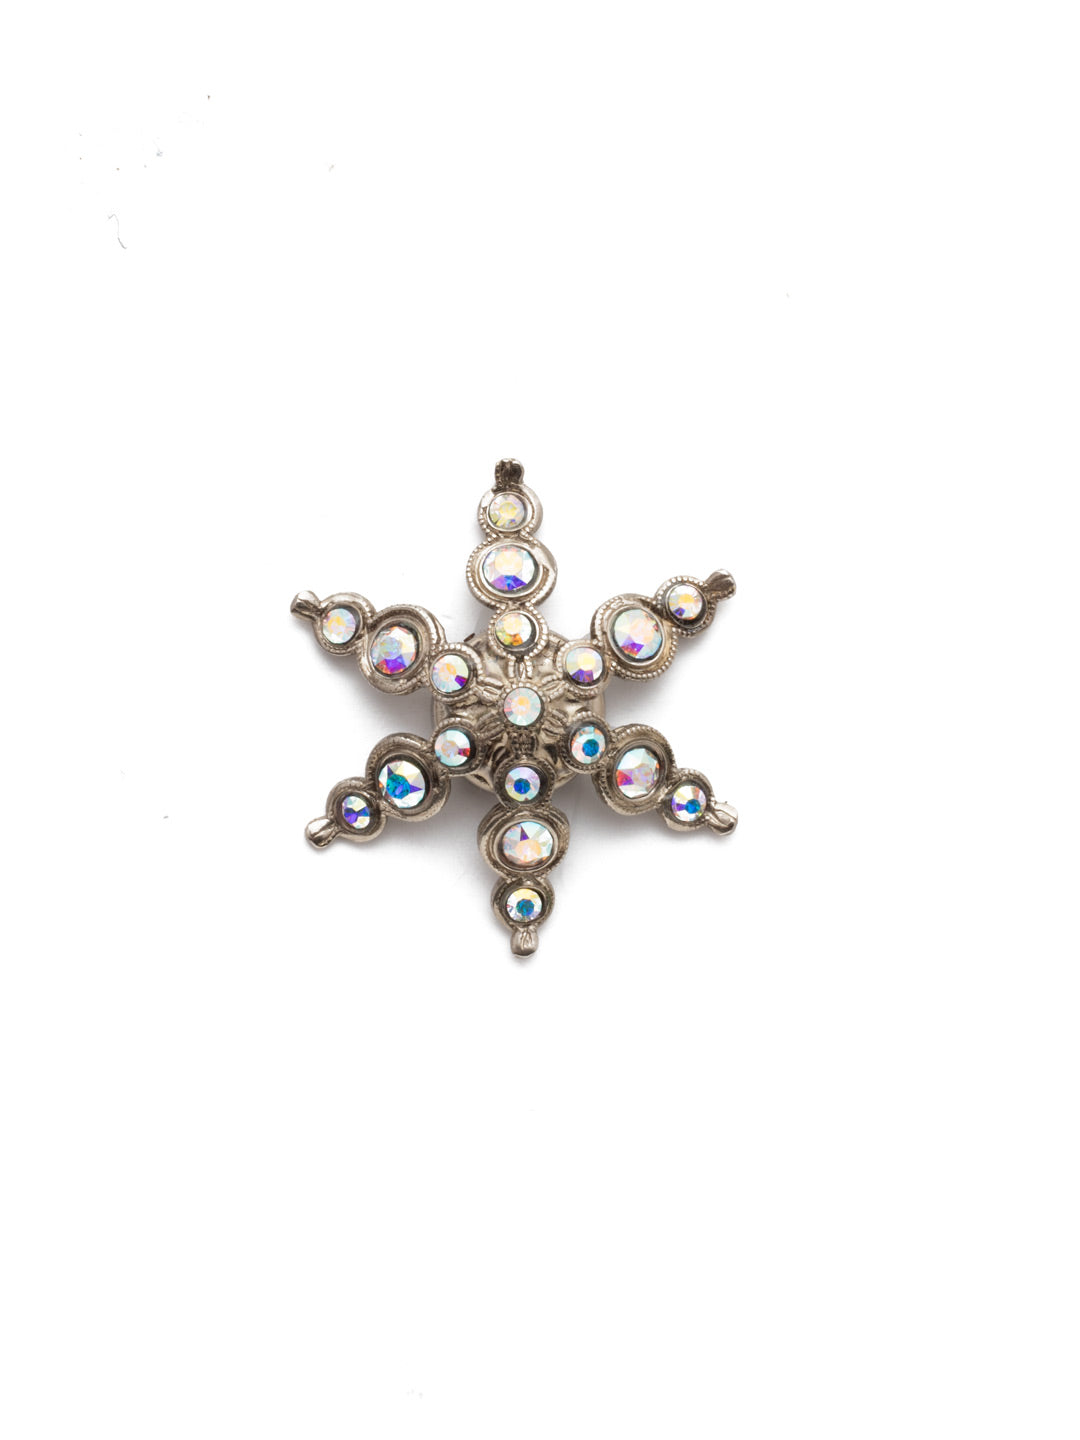 Lumi Magnetic Charm - CHM6ASCAB - <p>Our Magnetic charms are hand-crafted with tiny crystals. Easily fasten the charm to your bag, blazer, dress or refrigerator you want to add some sparkle to. From Sorrelli's Crystal Aurora Borealis collection in our Antique Silver-tone finish.</p>